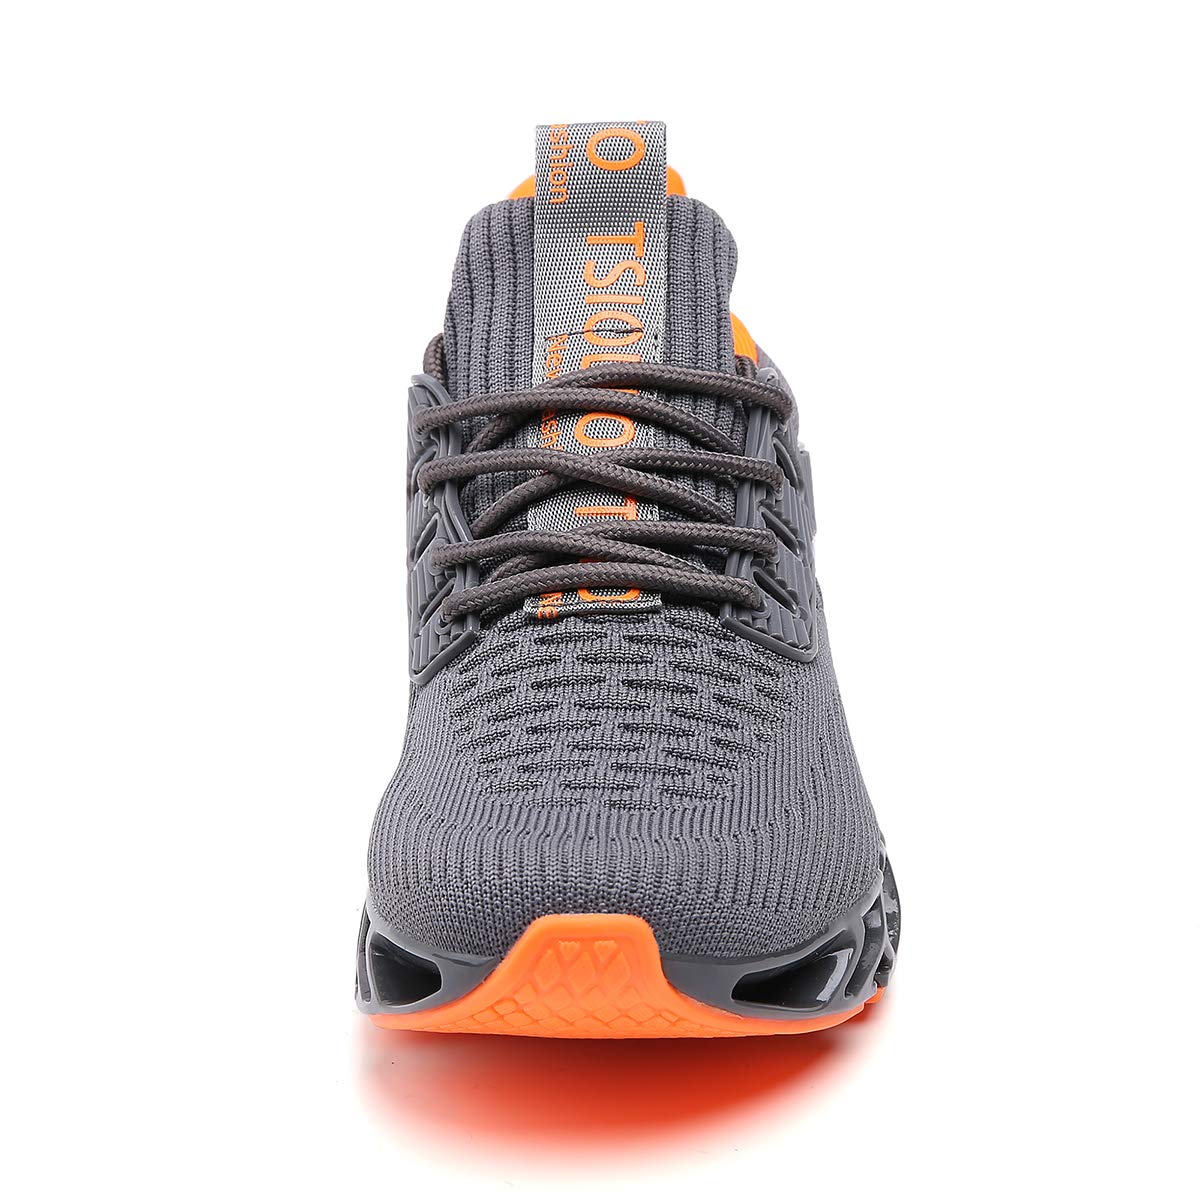 Ezkrwxn Men Sport Running Shoes Mesh Breathable Comfort Fashion Casual Tennis Athletic Walking Sneakers Gym Runner Jogging Shoe Grey Size 11.5